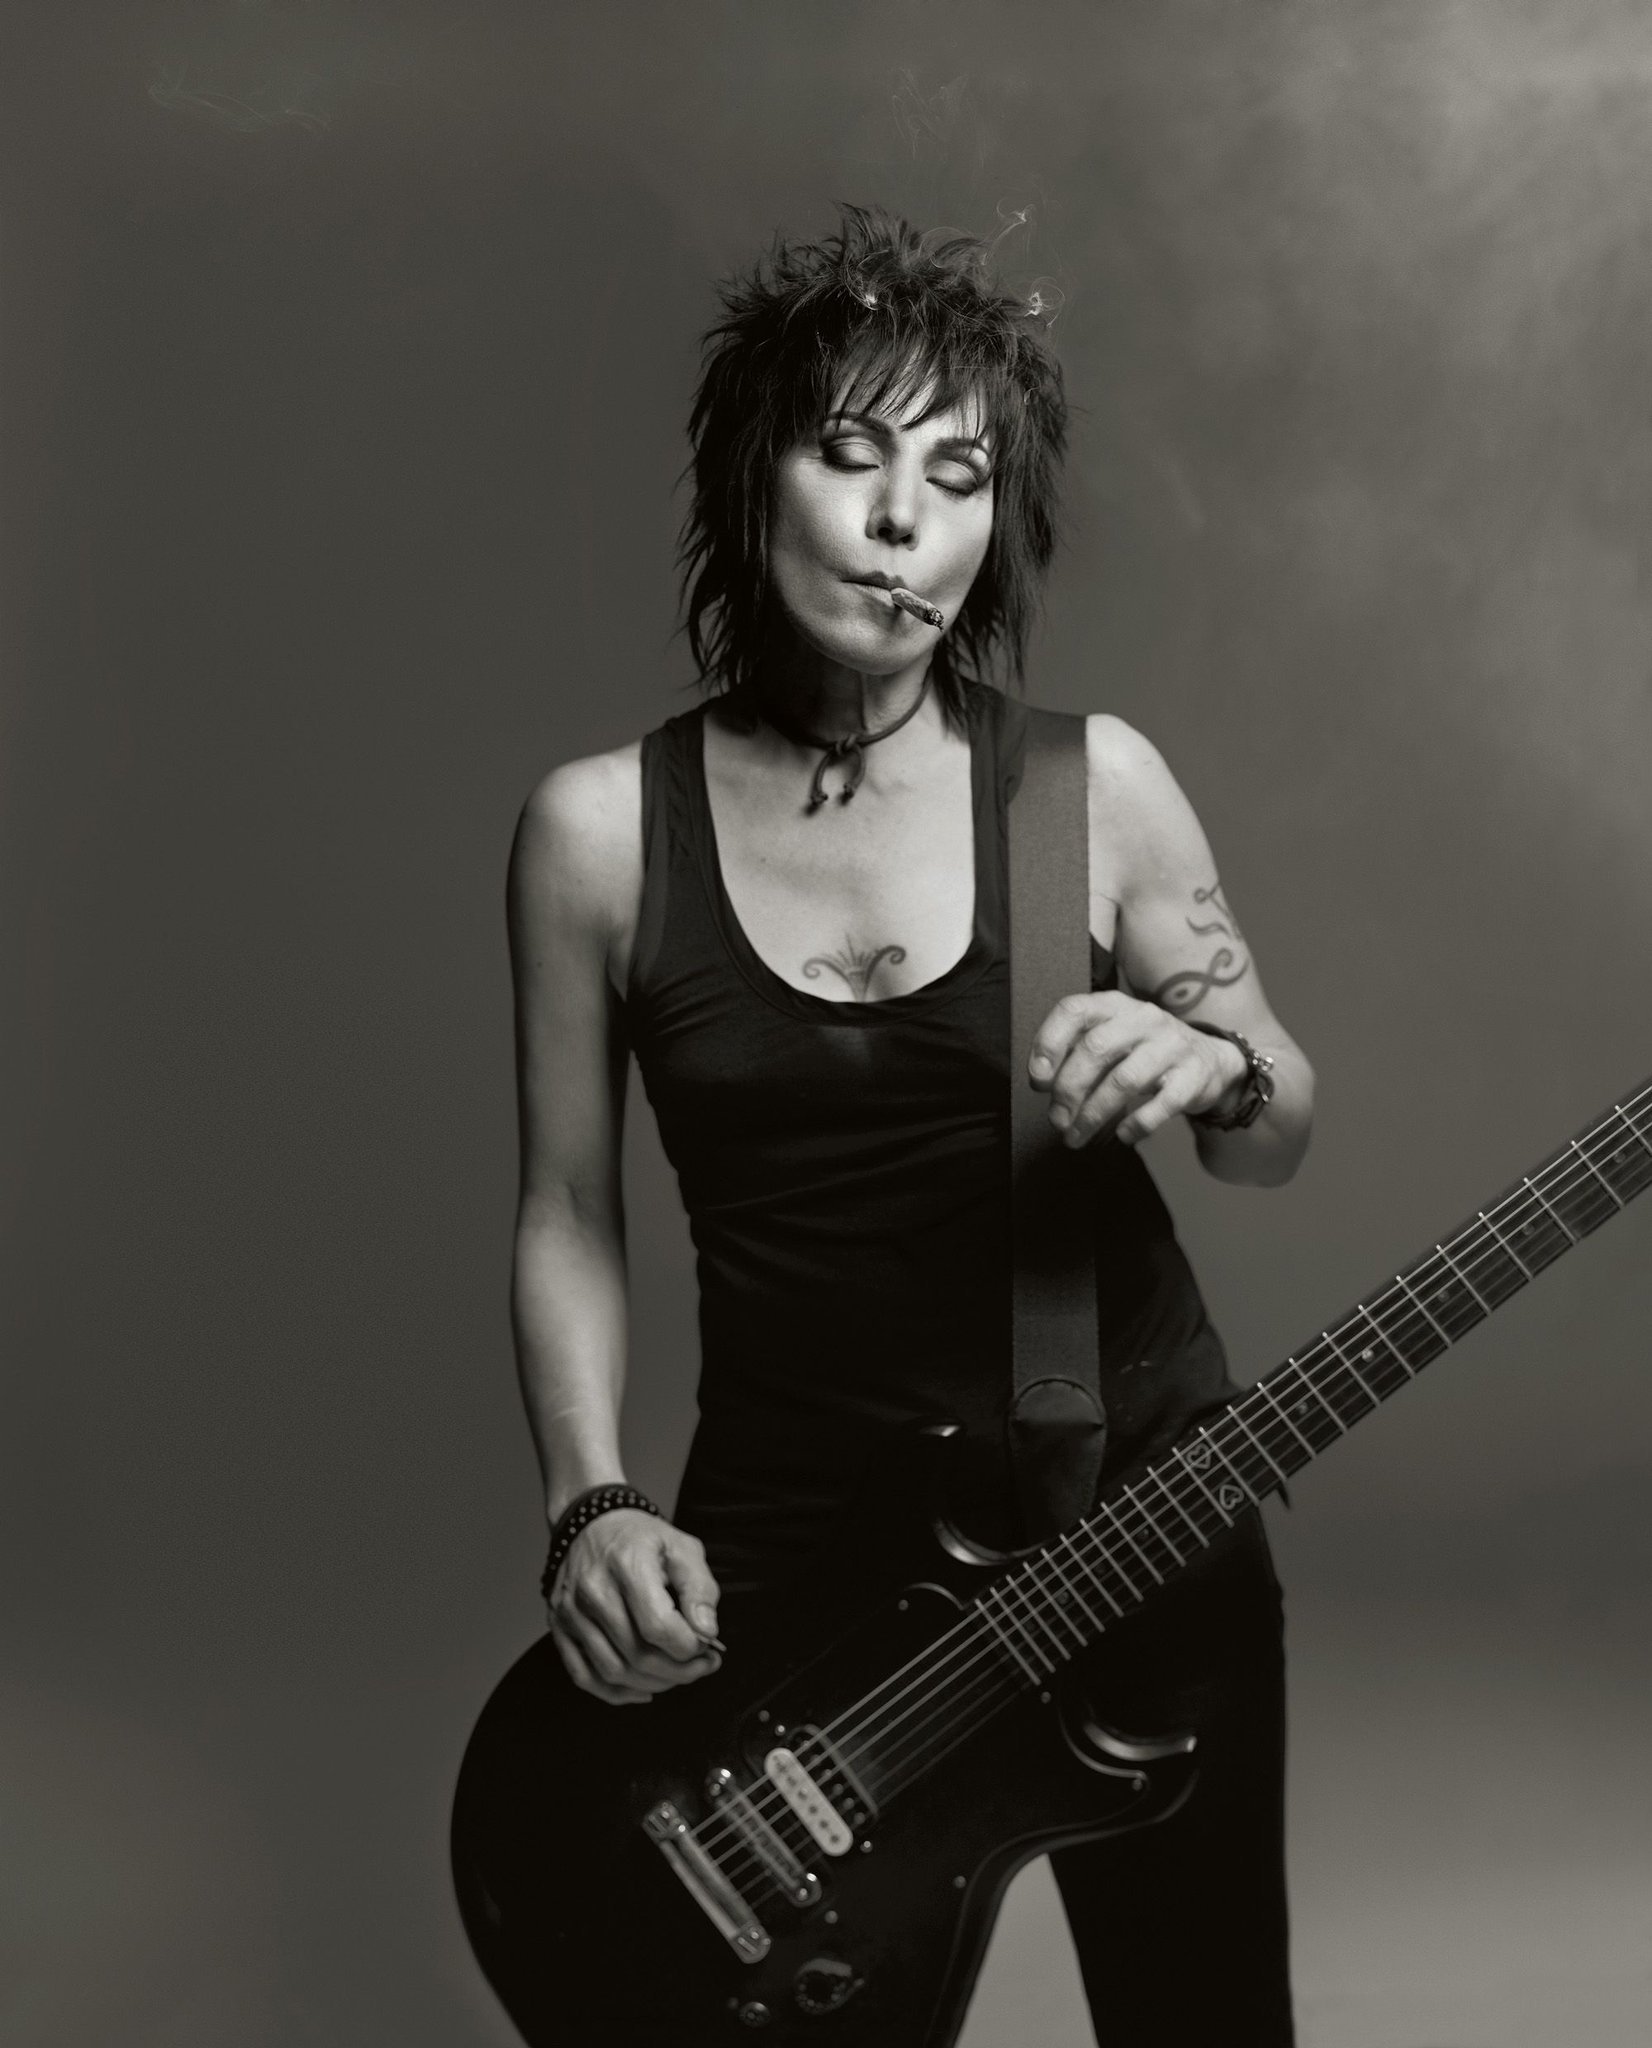 Happy 60th birthday to the awesome Joan Jett! 